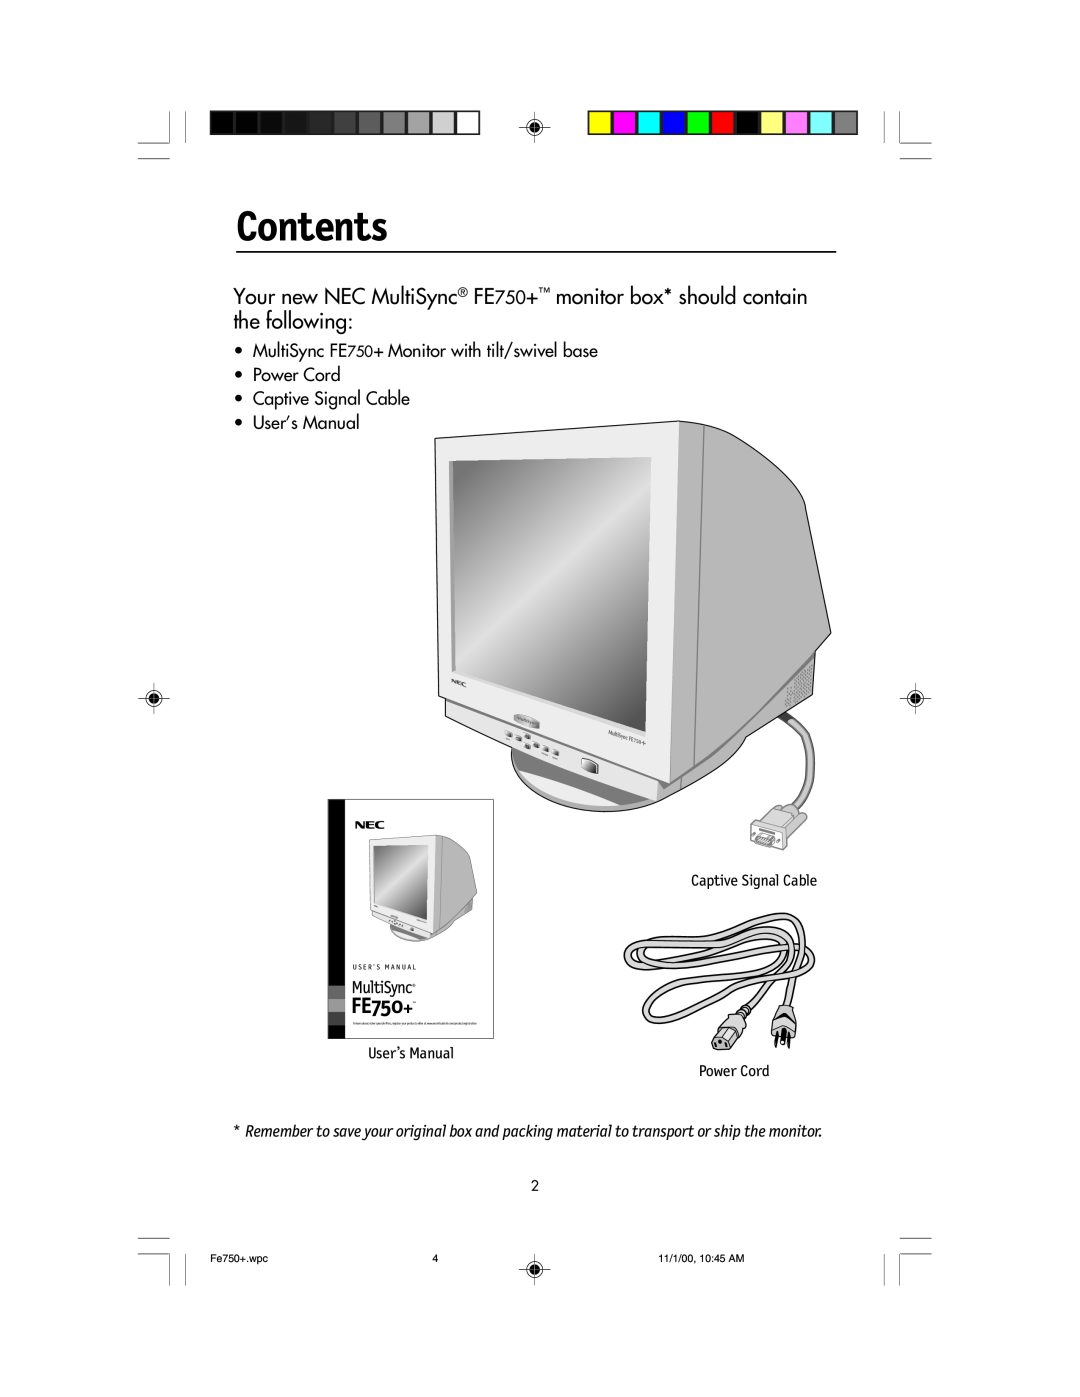 NEC FE750 Plus user manual Contents, FE750+, User’s Manual, Captive Signal Cable Power Cord, Fe750+.wpc, 11/1/00, 1045 AM 